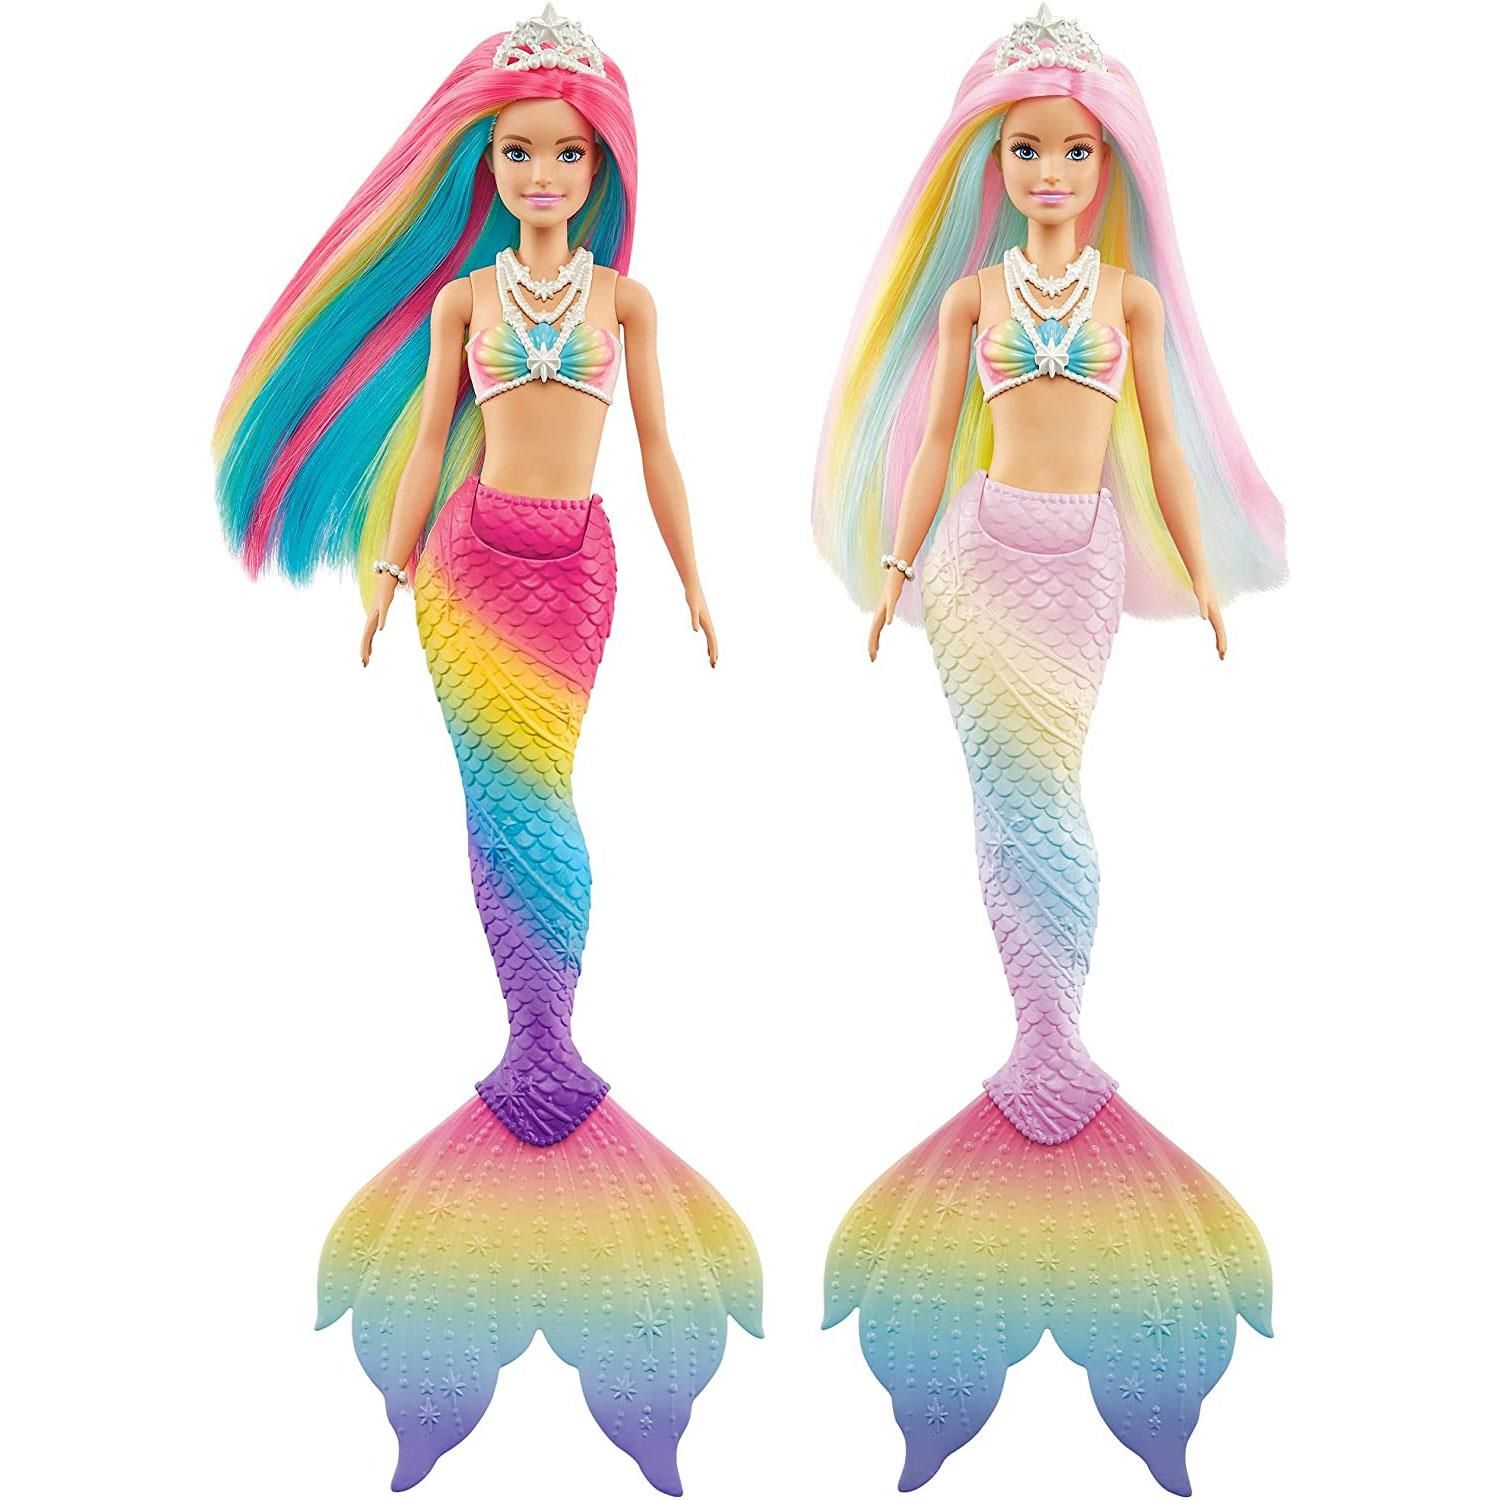 Barbie Dreamtopia Rainbow Magic Colour-Change Mermaid

This Barbie Dreamtopia Rainbow Magic Mermaid doll features a colour-change transformation that lets imaginations dive into their most colourful fairytales yet! The Barbie mermaid doll features a neon-bright fantasy look with a tiara in her rainbow hair, a vibrant multi-coloured tail and a bodice with sea-inspired accents. Ready for a colour transformation? Dip the Barbie doll in warm water and watch her hair, bodice and tail instantly change colour to reveal a rainbow of pretty pastels! Dip her in ice-cold water to see her change back to her original neon-bright look and relive the transformation again and again. Doll cannot swim or stand alone. Colours and decorations may vary.

Features:

​Bring a fantastical colour-change transformation to playtime with Barbie Dreamtopia Rainbow Magic Mermaid doll.
​The Barbie mermaid doll features a neon-bright fantasy look with a tiara in her rainbow hair, a multi-coloured tail and a bodice with sea-inspired accents.
​Dip the Barbie doll in warm water to see her hair, bodice and tail instantly transform to reveal a rainbow of pretty pastels.
​Dip her in ice-cold water to see her change back to her original neon-bright look and relive the transformation again and again.
​Fairytale lovers will have so much fun transforming the Barbie doll's look and taking her on enchanted undersea adventures.
​Barbie Dreamtopia Rainbow Magic Mermaid dolls make a great bath toy or gift for 3 to 7-year-olds.

Box Contains: Barbie Dreamtopia Rainbow Magic Colour-Change Mermaid